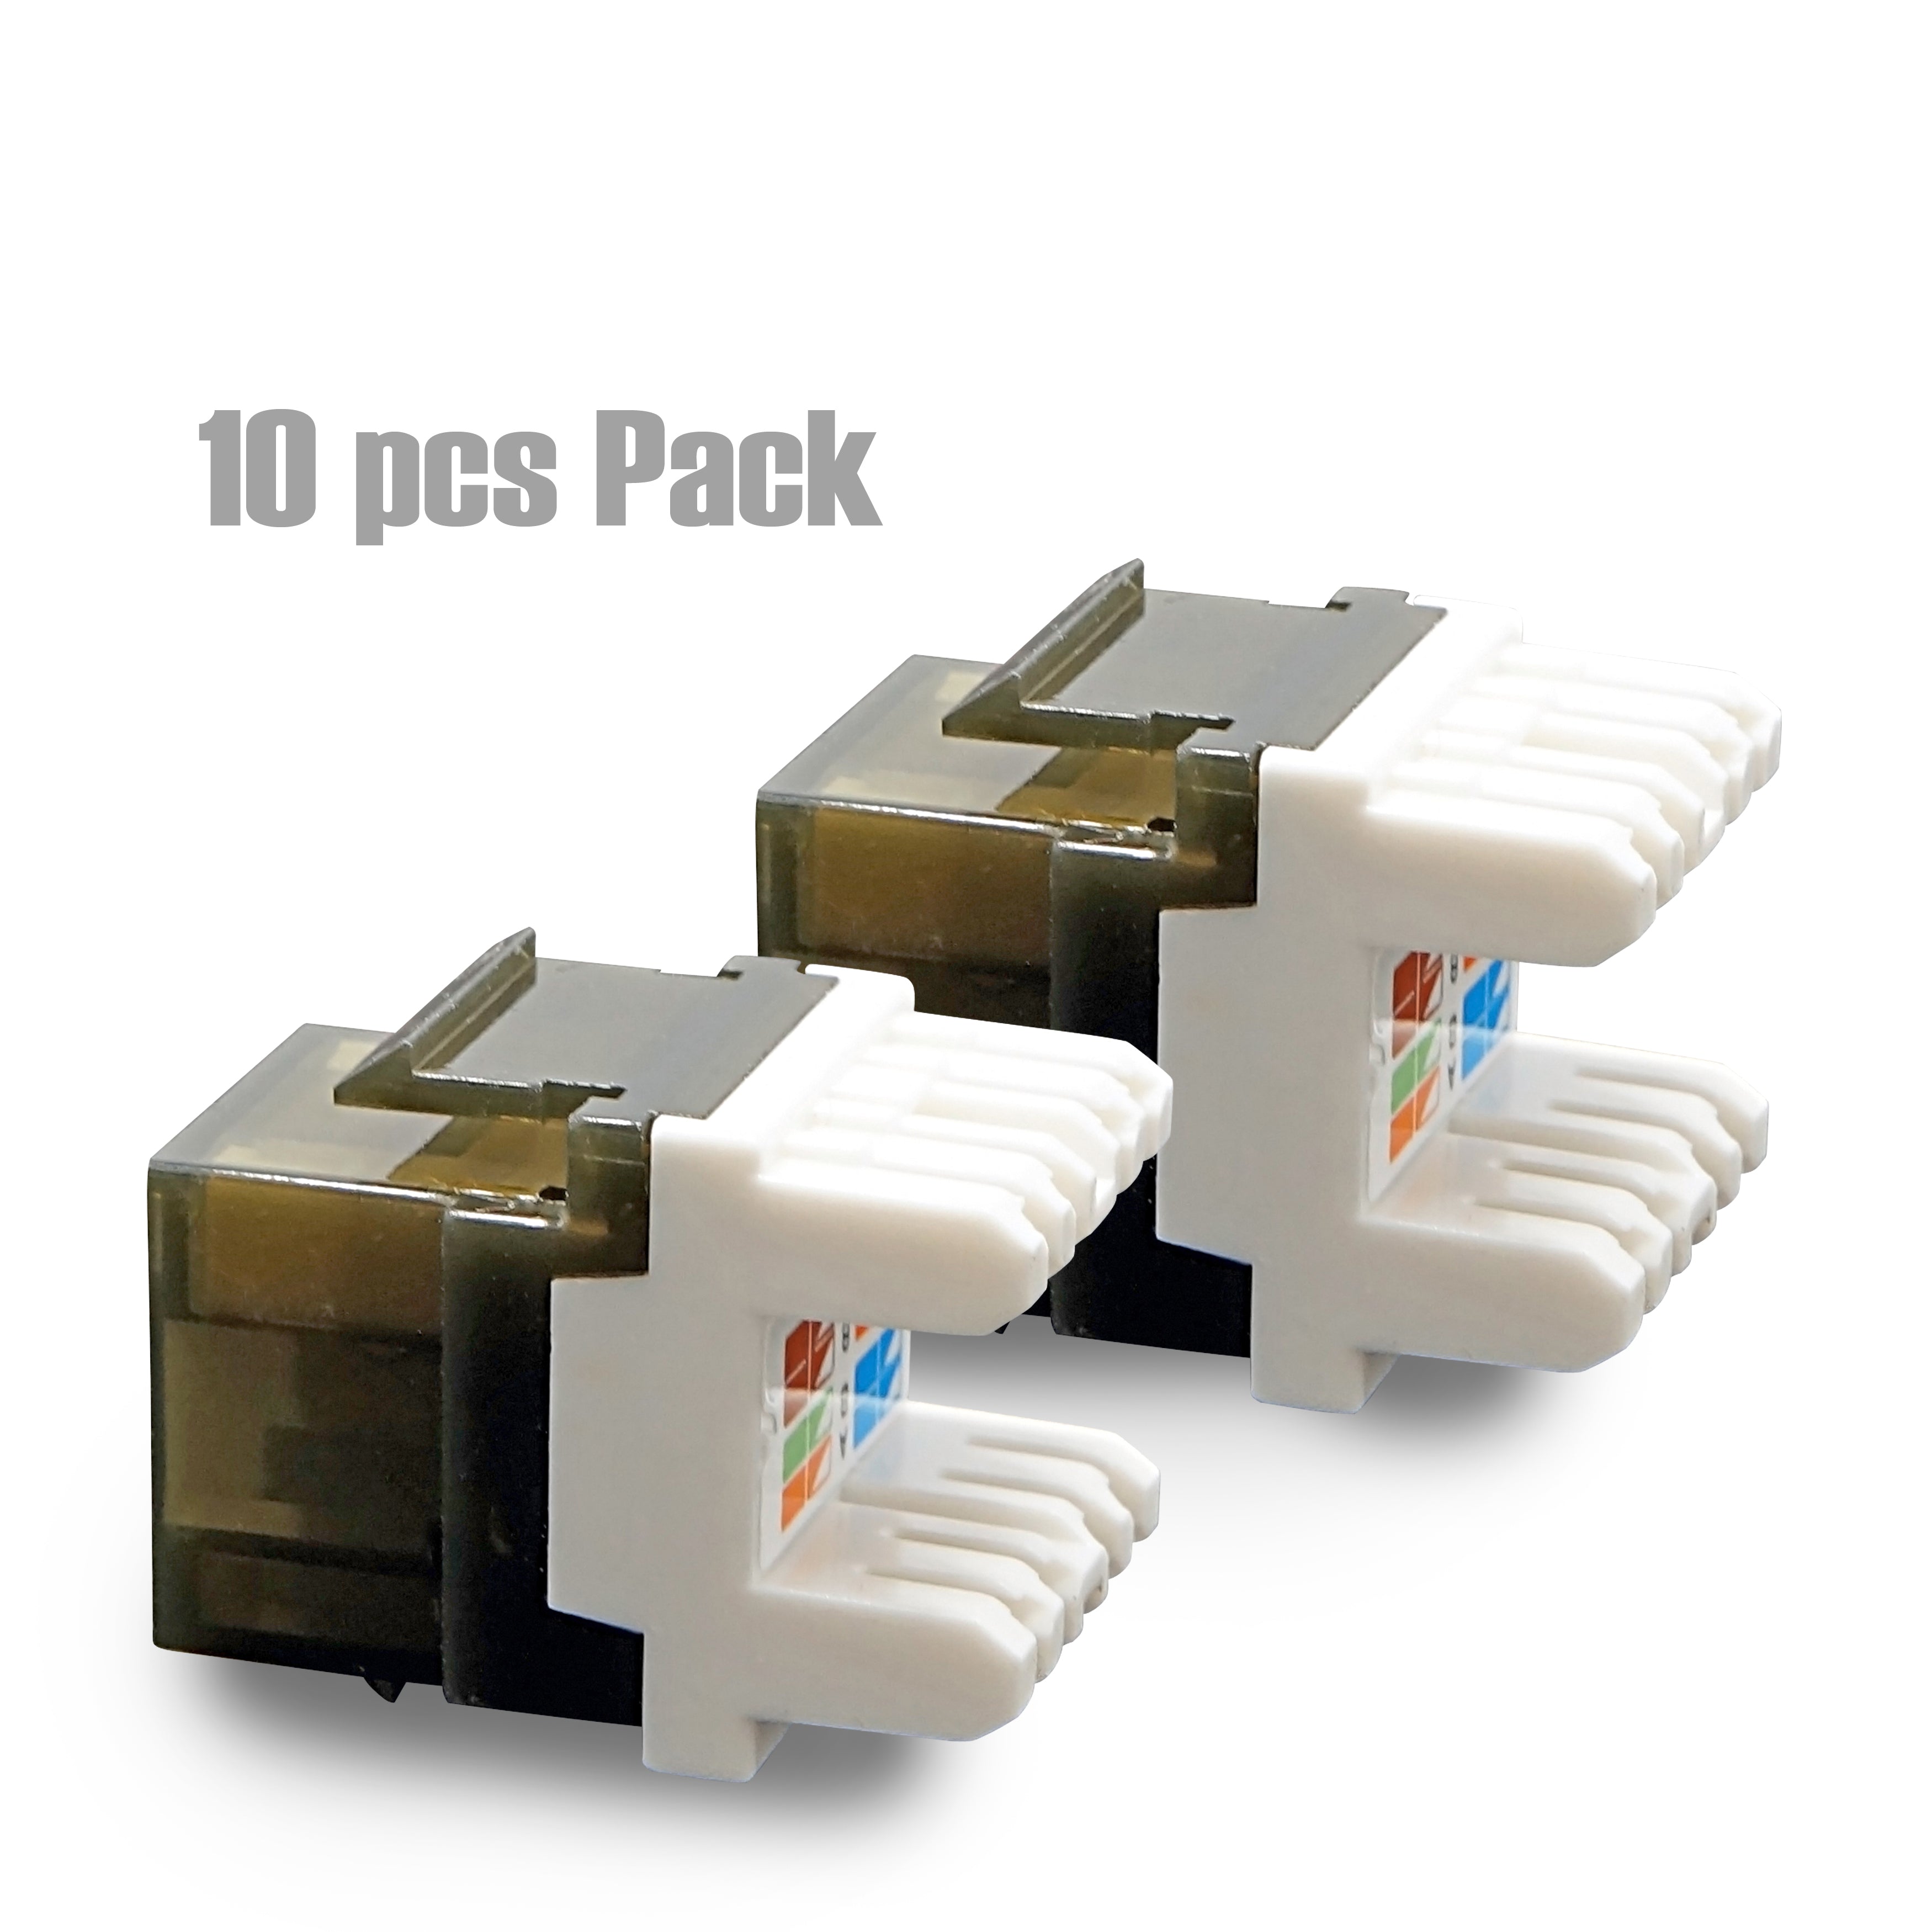 UTP Cat.6A/Cat.6/Cat.5e Gold Plated Keystone Modular Jack with LED